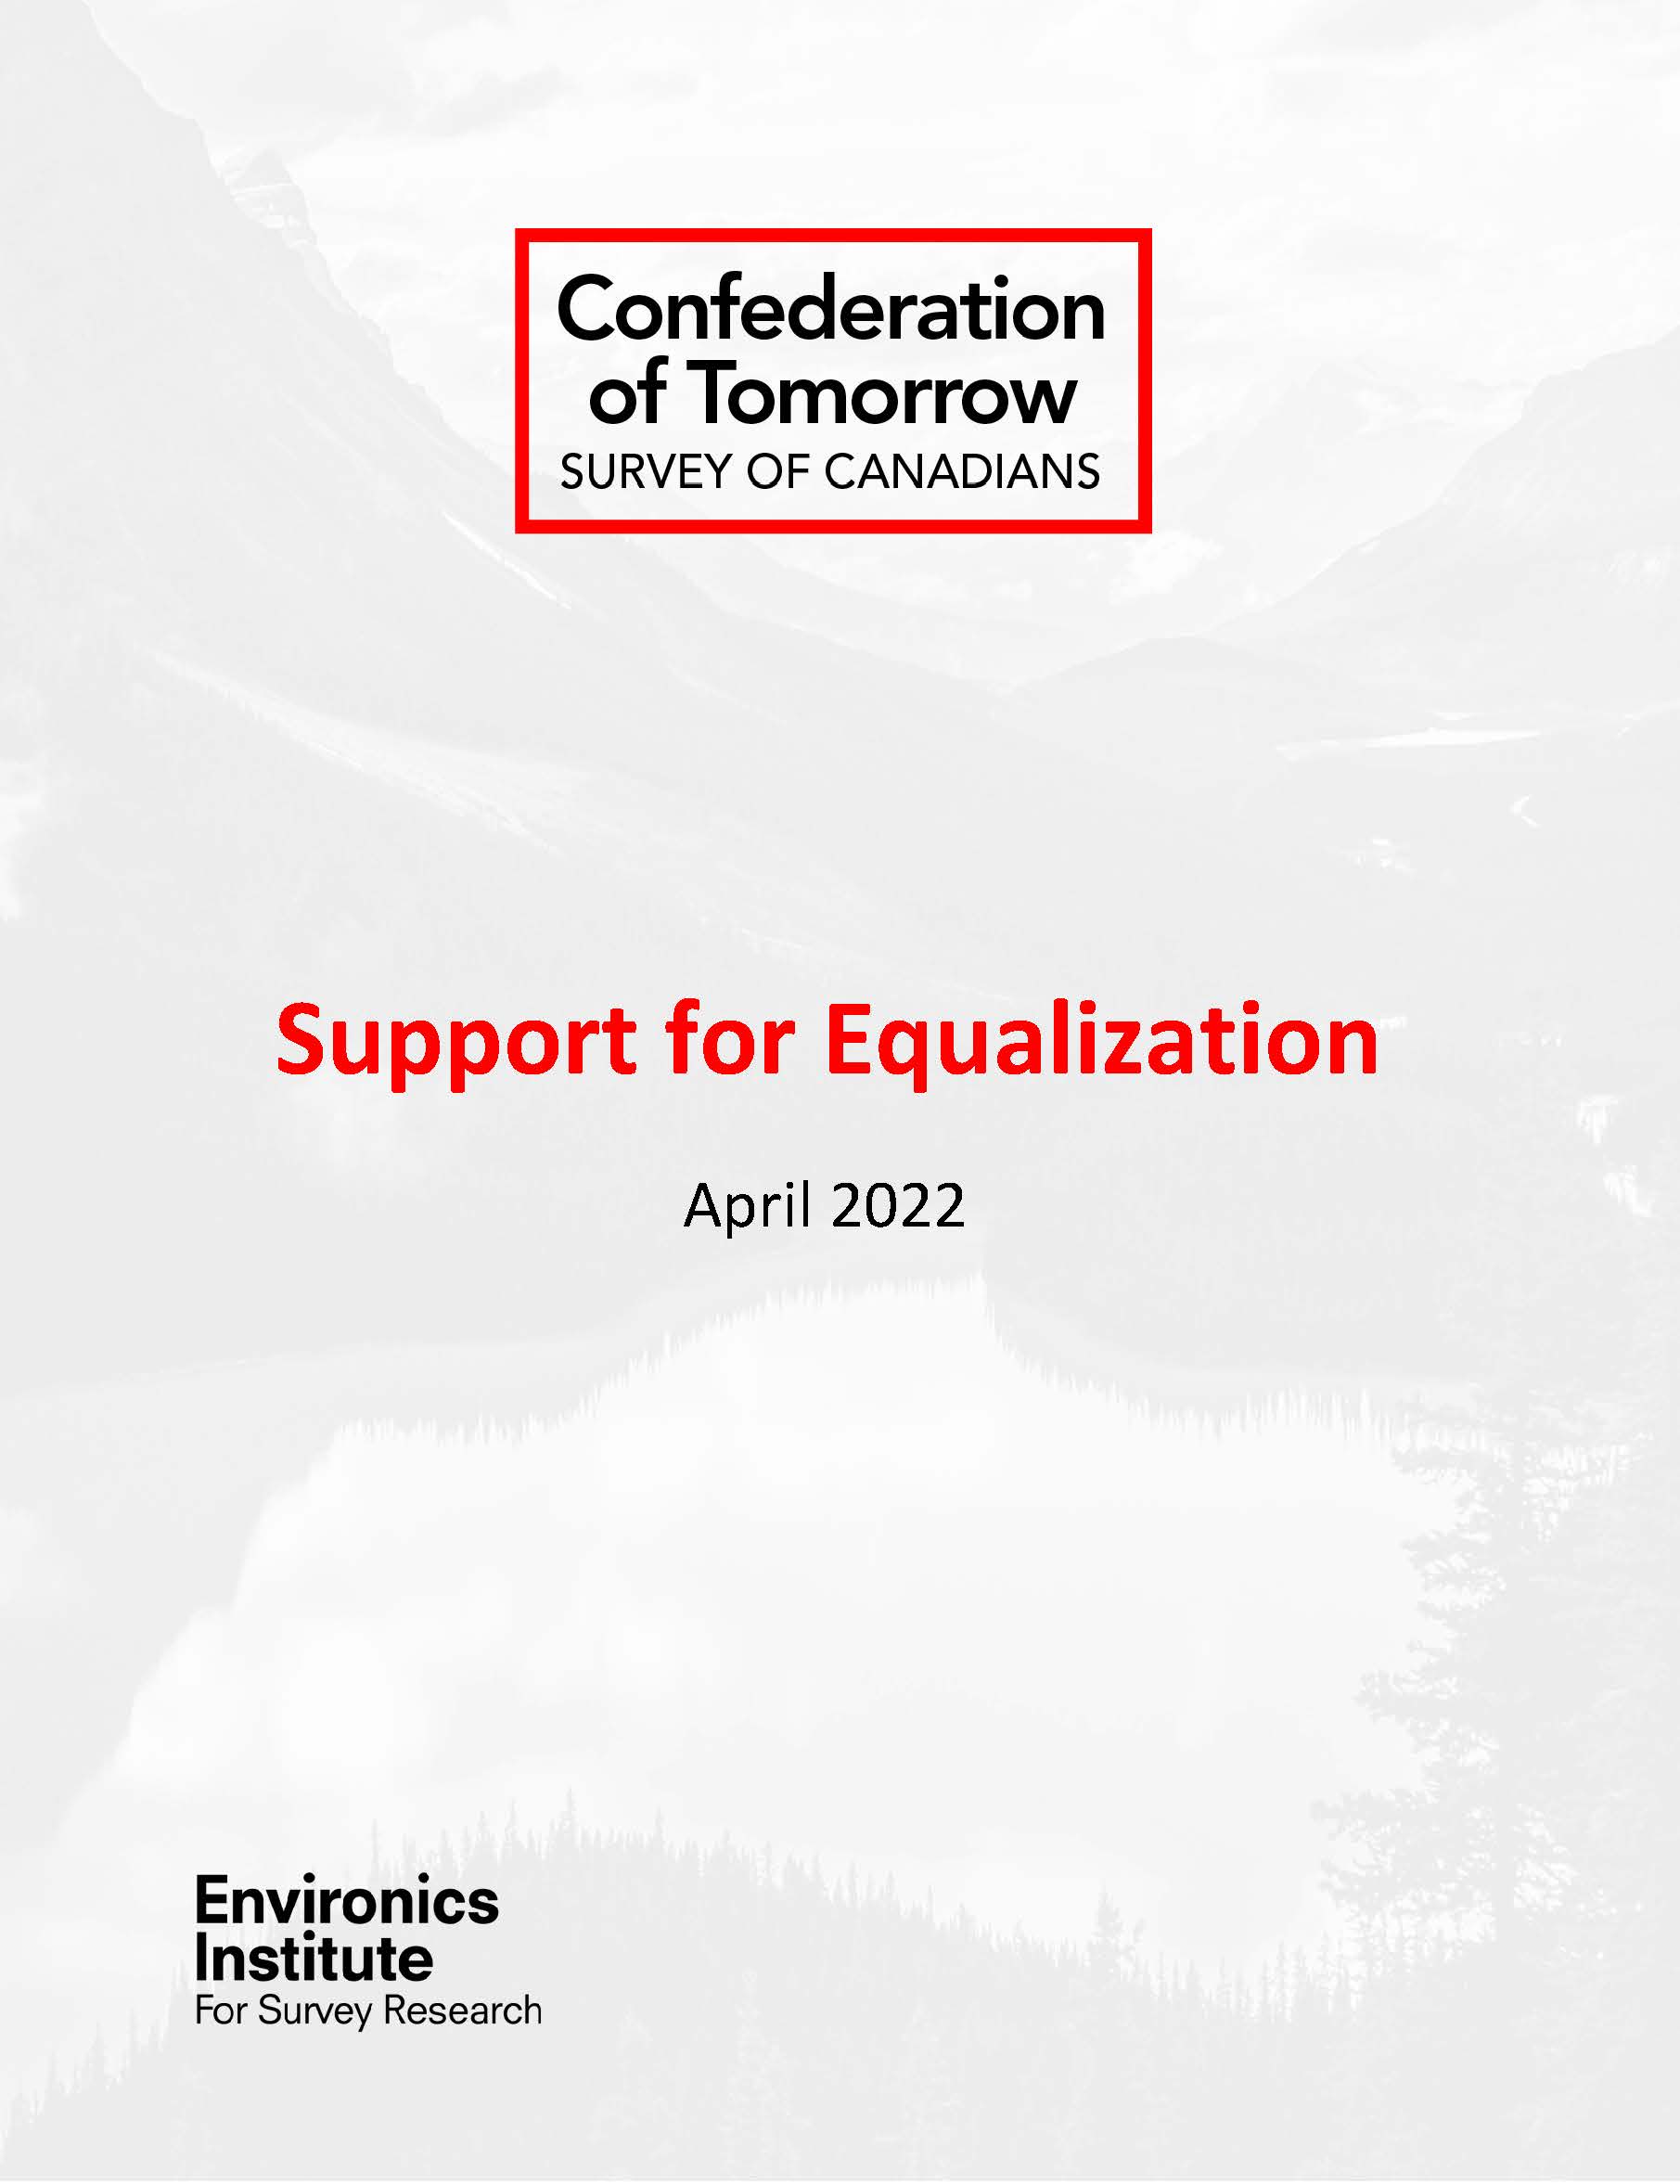 Confederation of Tomorrow: Support for Equalization